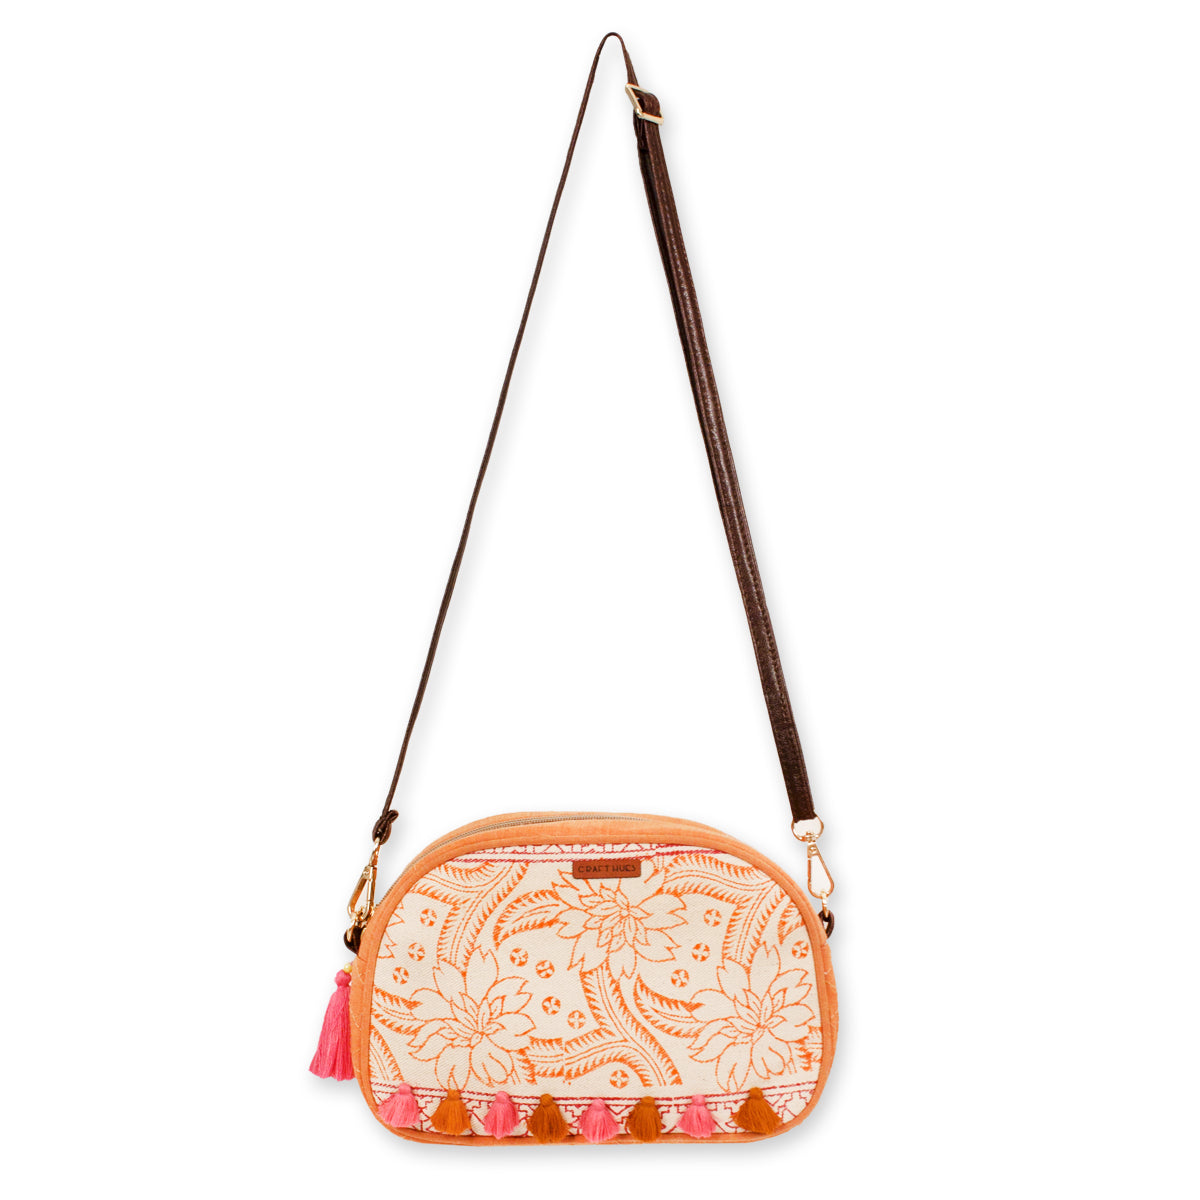 INDHA Dholak Embroidery Orange Colour Ethnic Hand Block Print College BagSling  Bag for GirlsWomen  Curated online shop for handcrafted products made in  India by women artisans